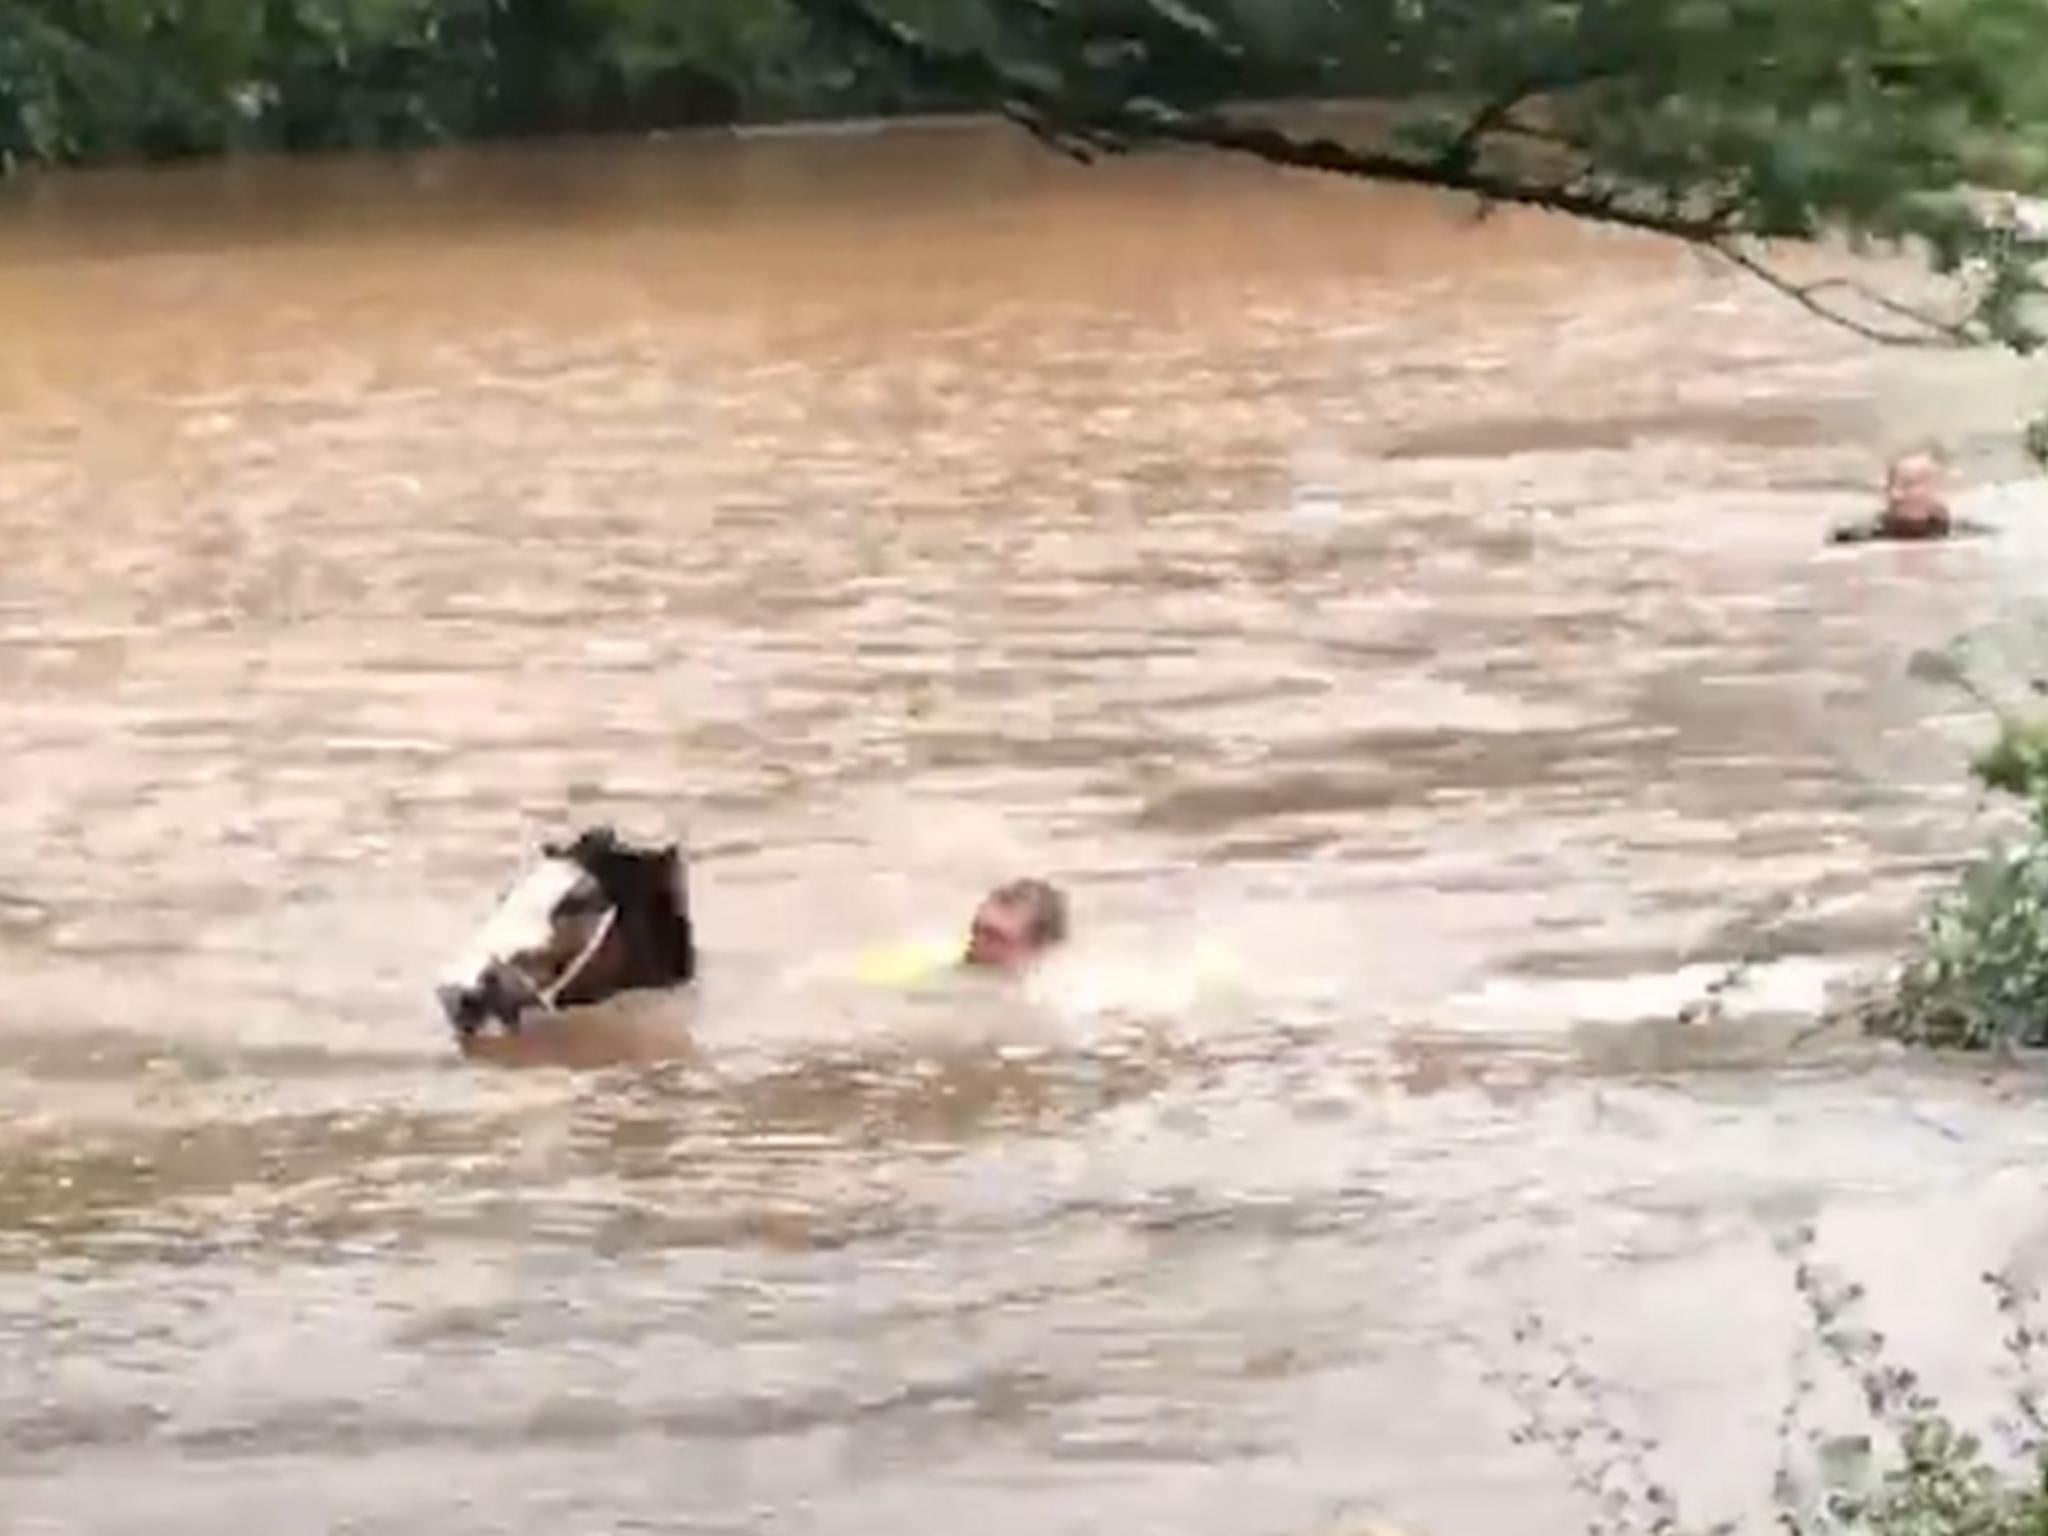 Storm Callum: Horses rescued from flooded field in Wales